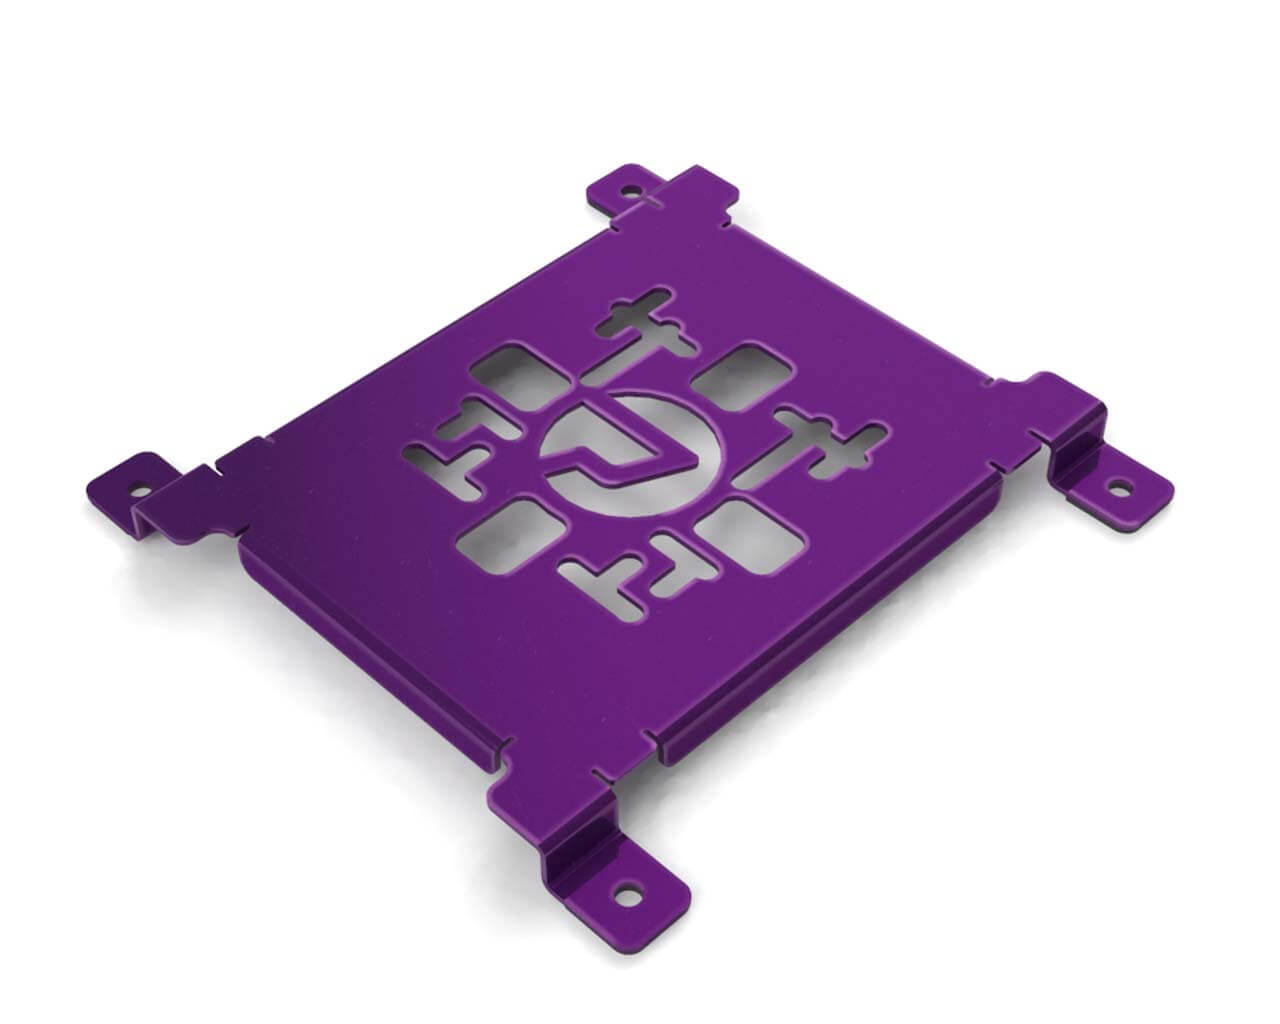 PrimoChill SX Spider Mount Bracket - 140mm Series - PrimoChill - KEEPING IT COOL Candy Purple